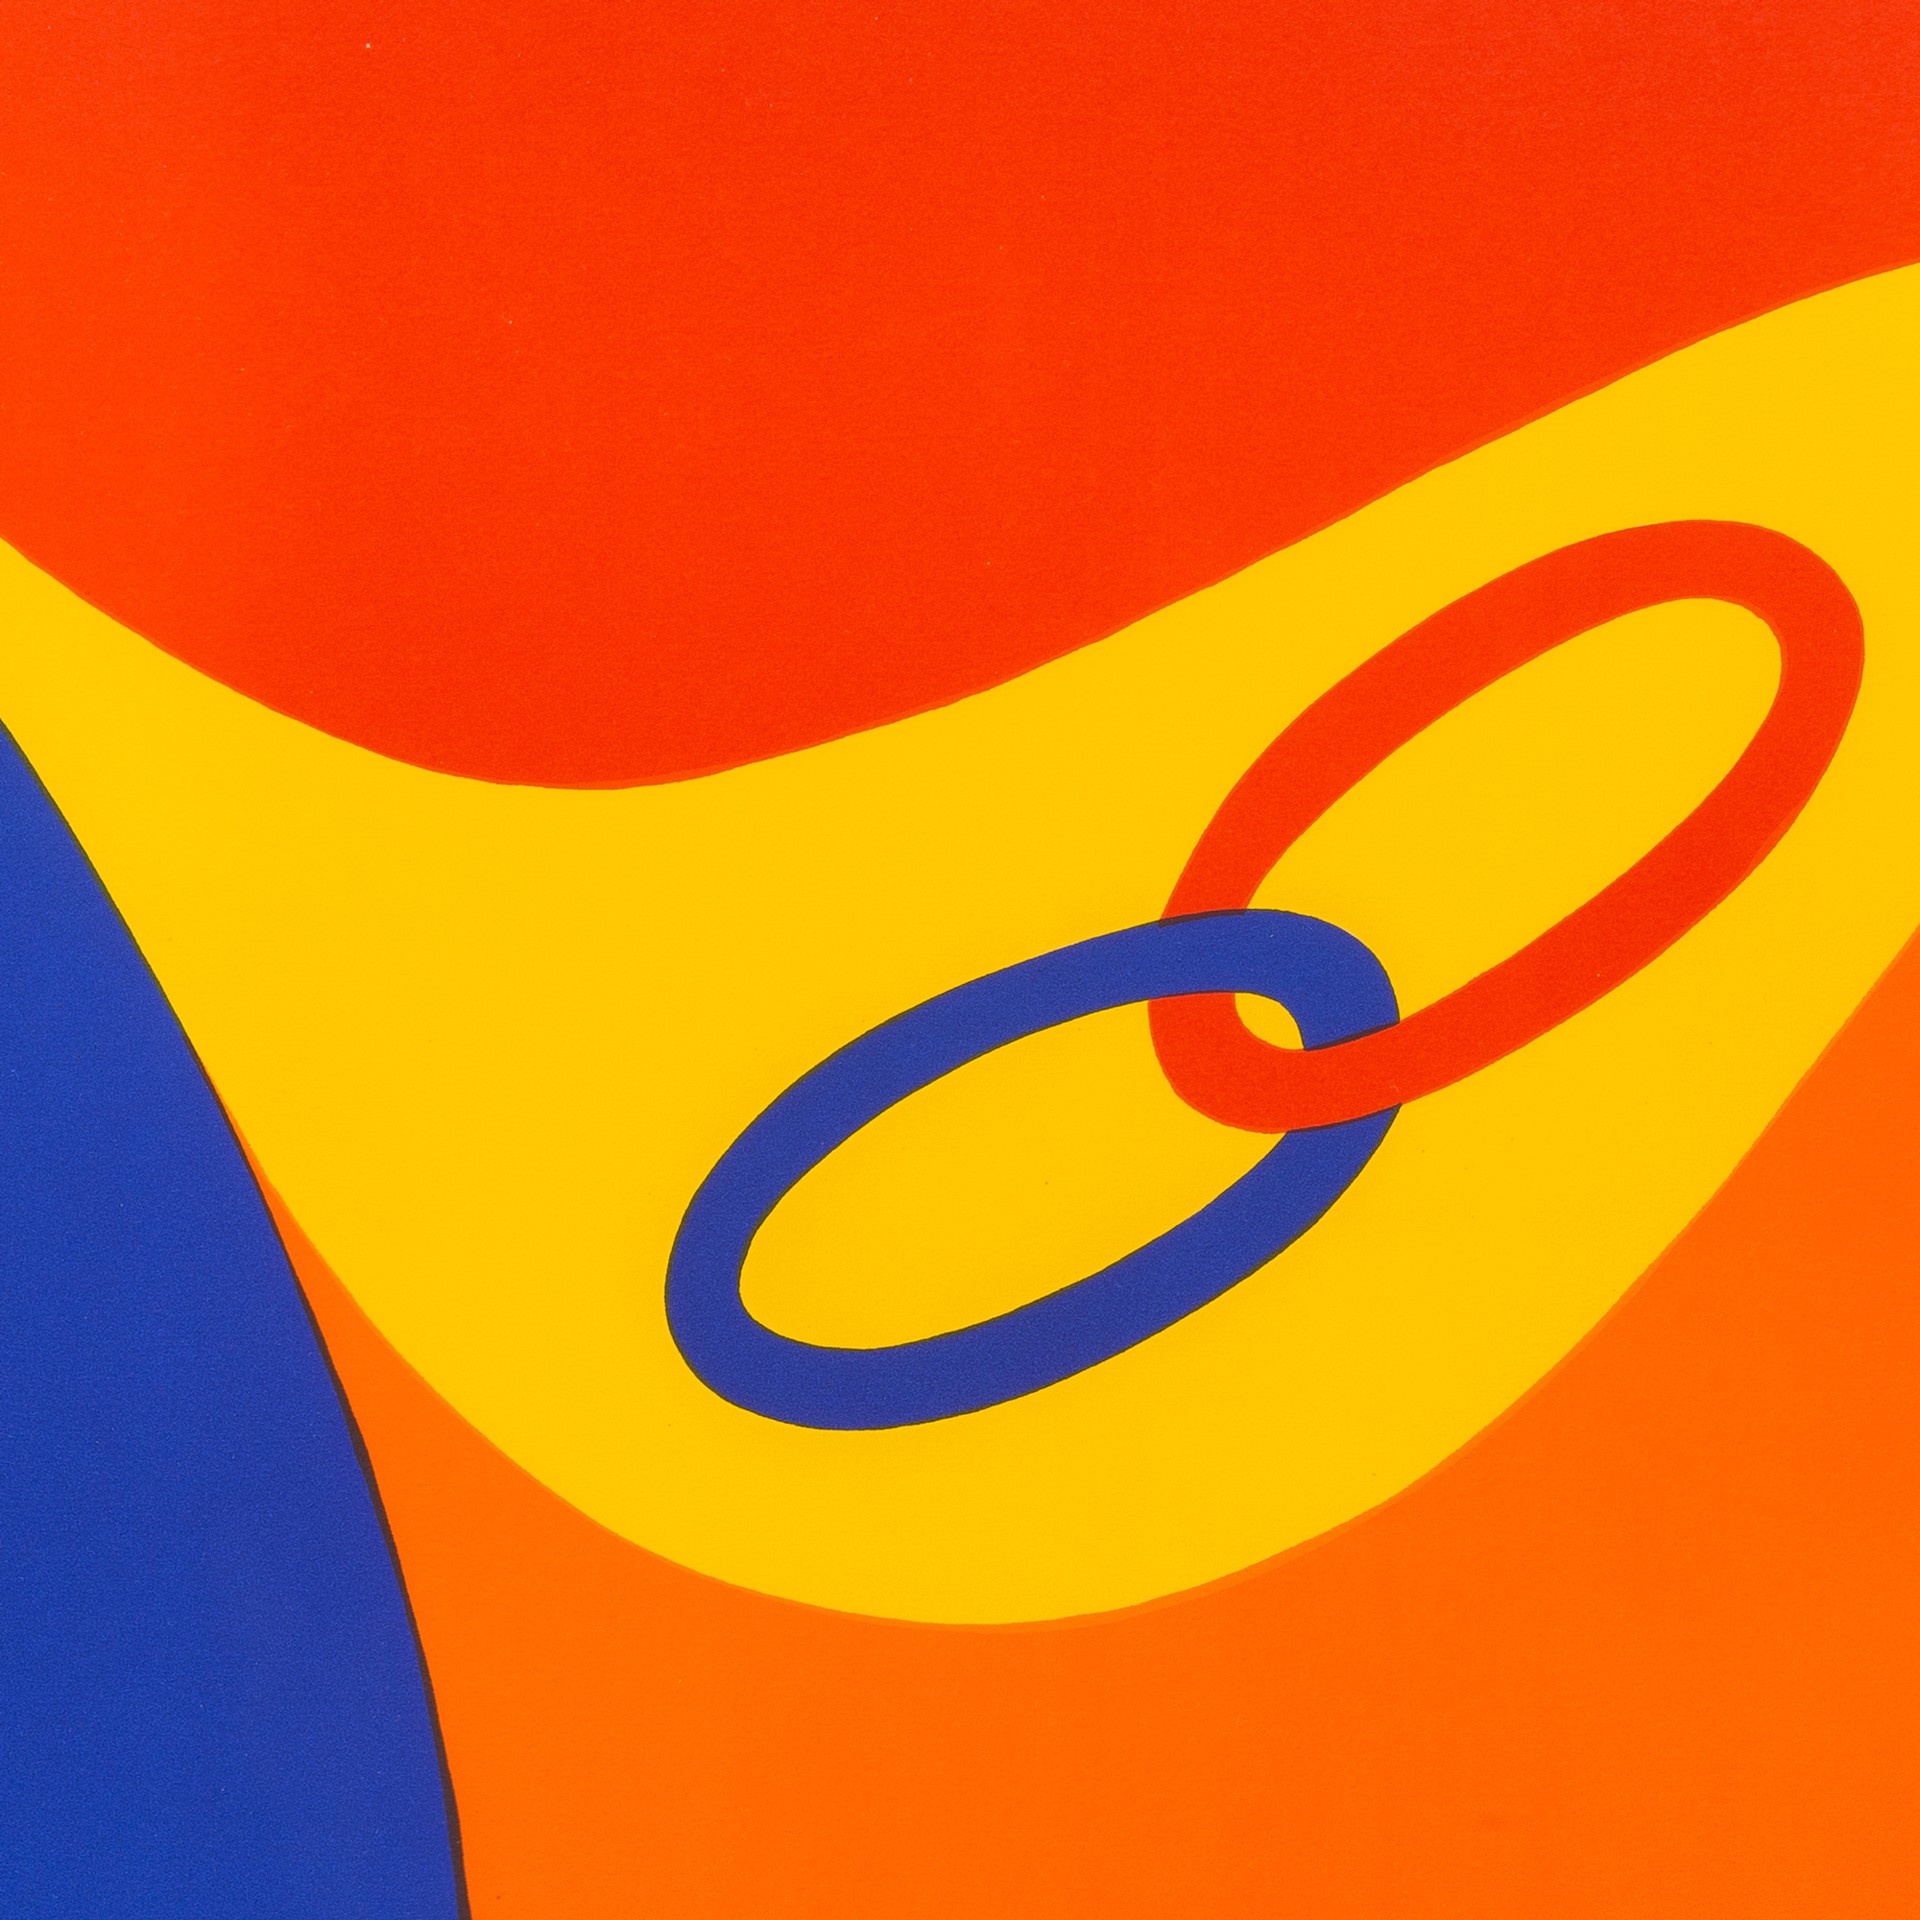 Friendship (from Flying Colors) by Alexander Calder